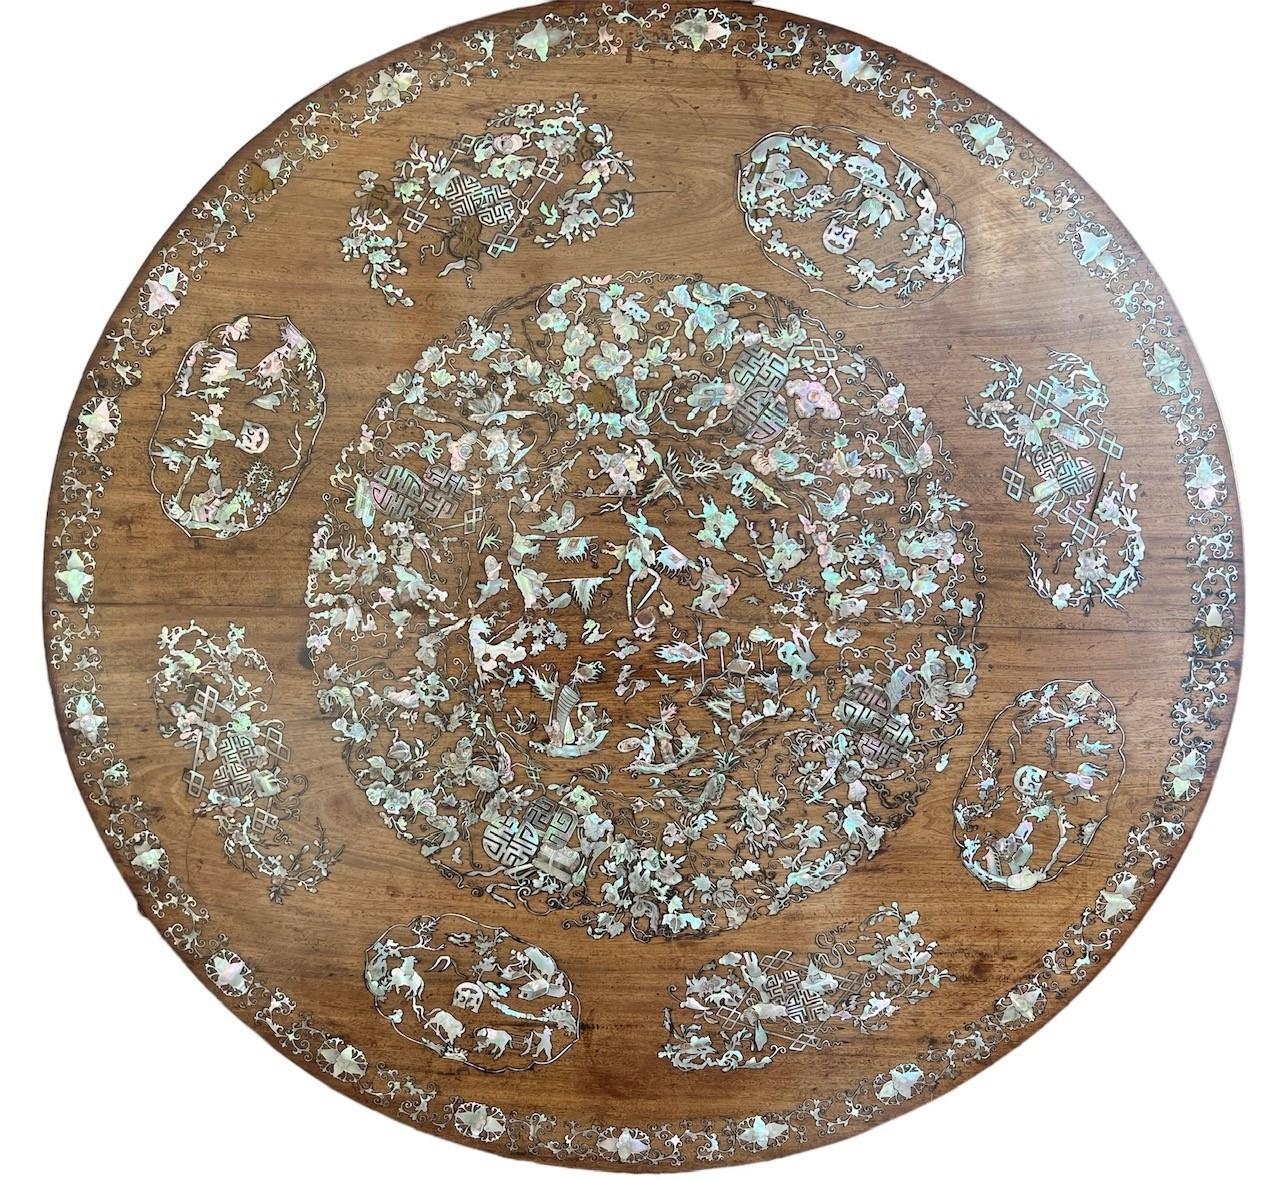 A FINE 19TH CENTURY ANGLO-CHINESE SOLID HARDWOOD AND MOTHER OF PEARL INLAID TILT TOP TABLE The - Image 3 of 9